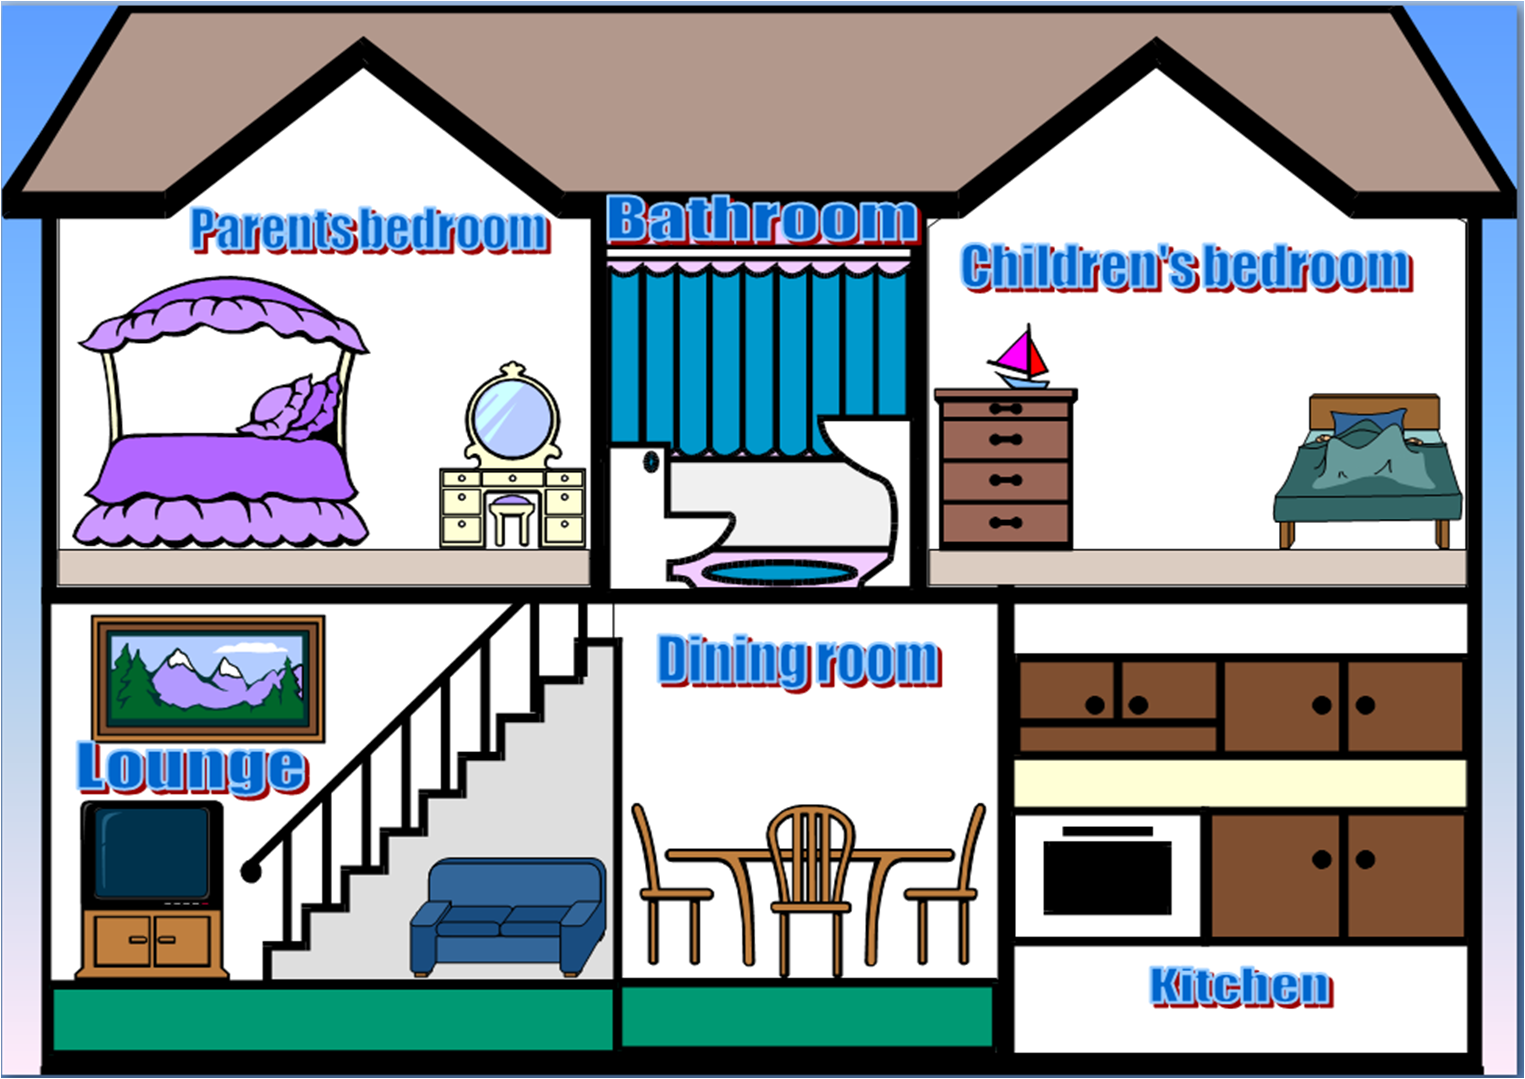 House Rooms for Kids. Rooms in the House for Kids. Parts of the House for Kids. Rooms in the House pictures. Stay my house